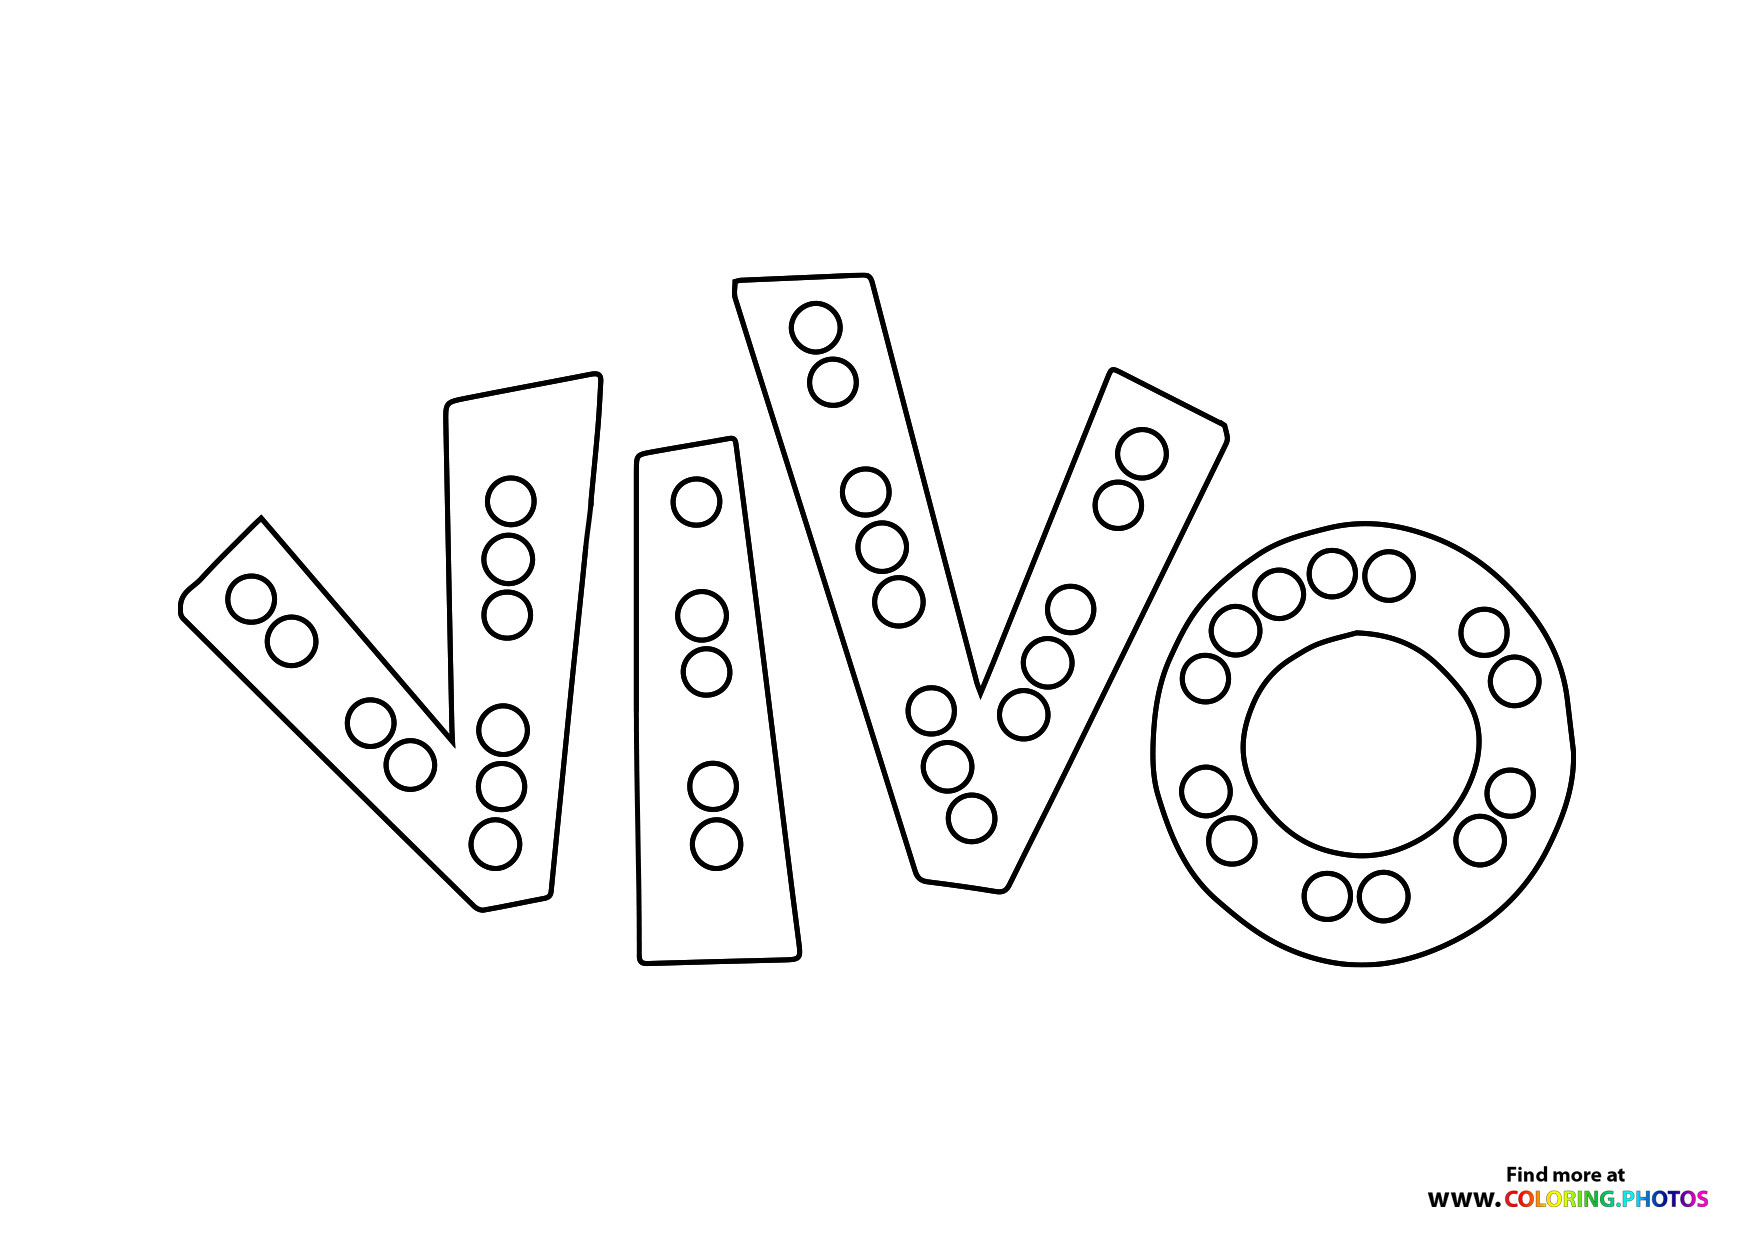 Netflix Vivo logo coloring - Coloring Pages for kids